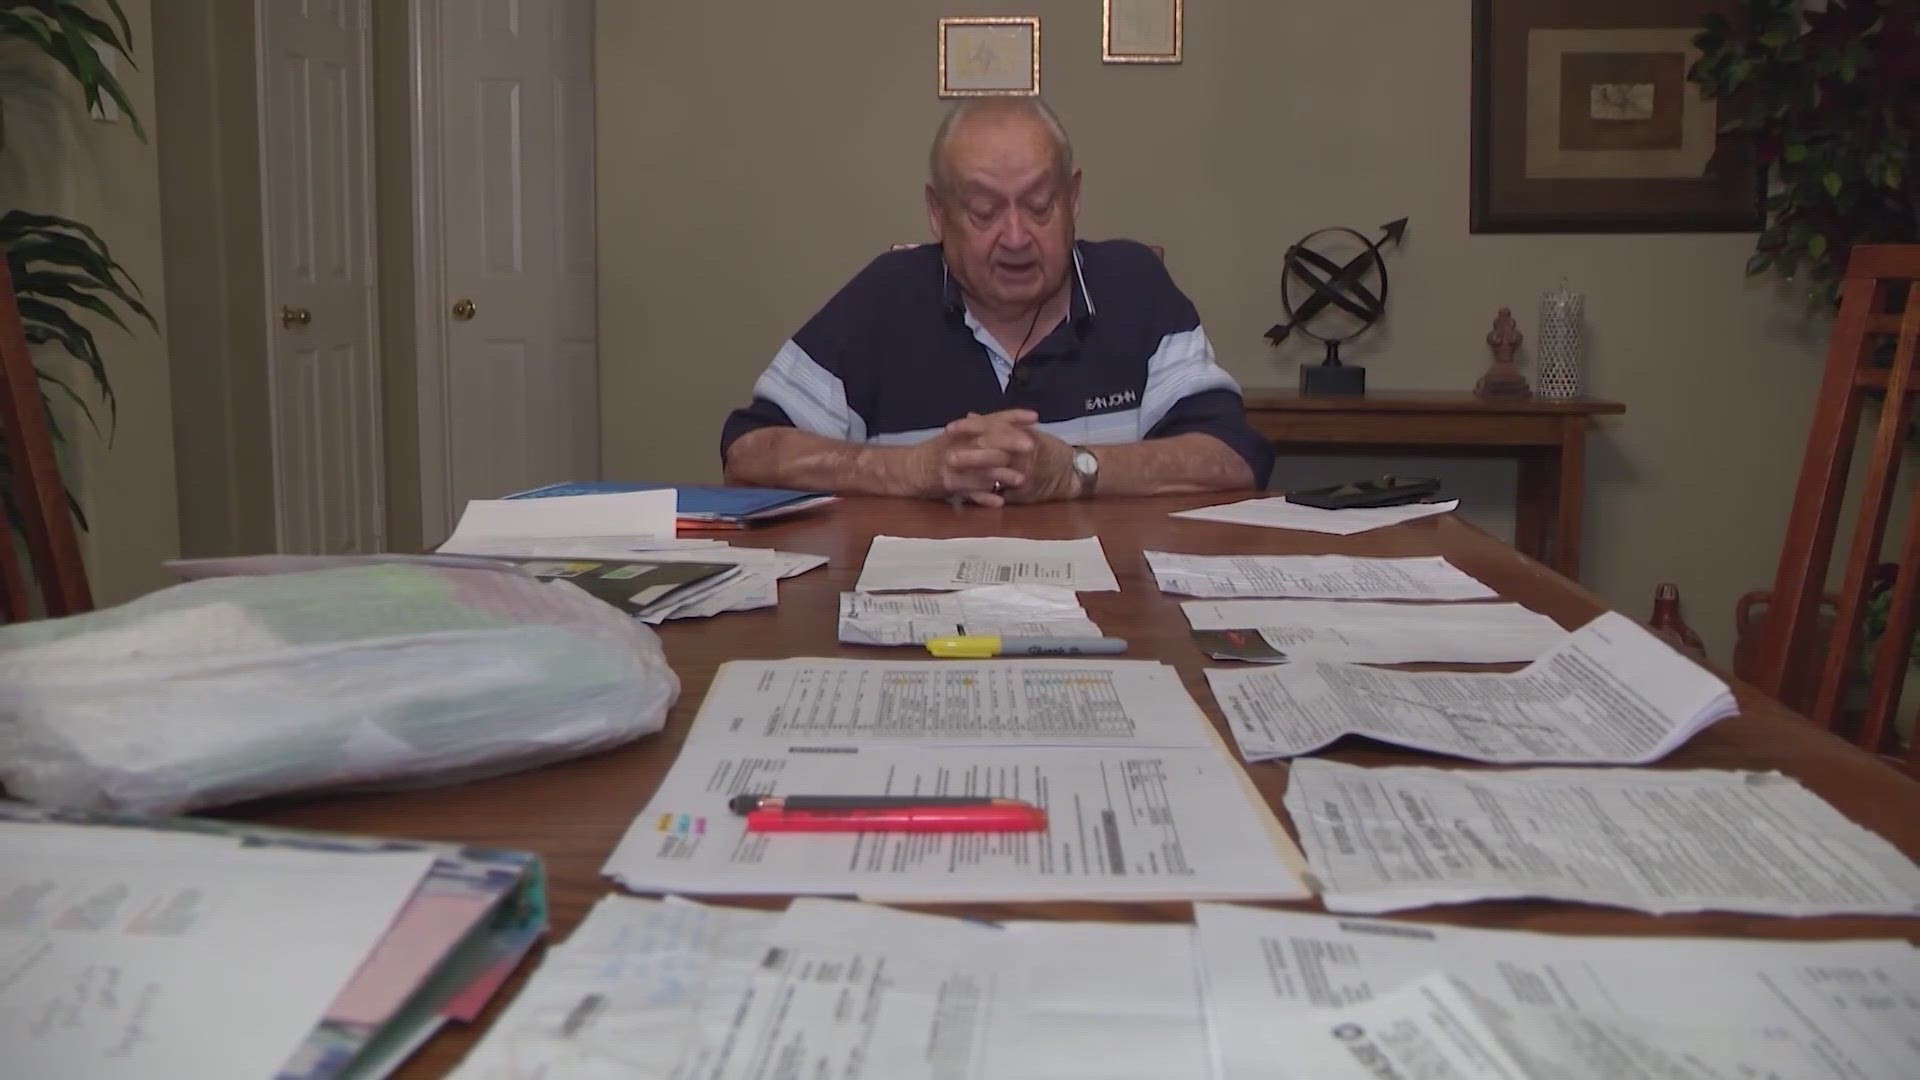 Since March, we've been sharing Roma "Joe" Whitten's story. He's a disabled vet who was scammed out of thousands of dollars by people he was trying to help.